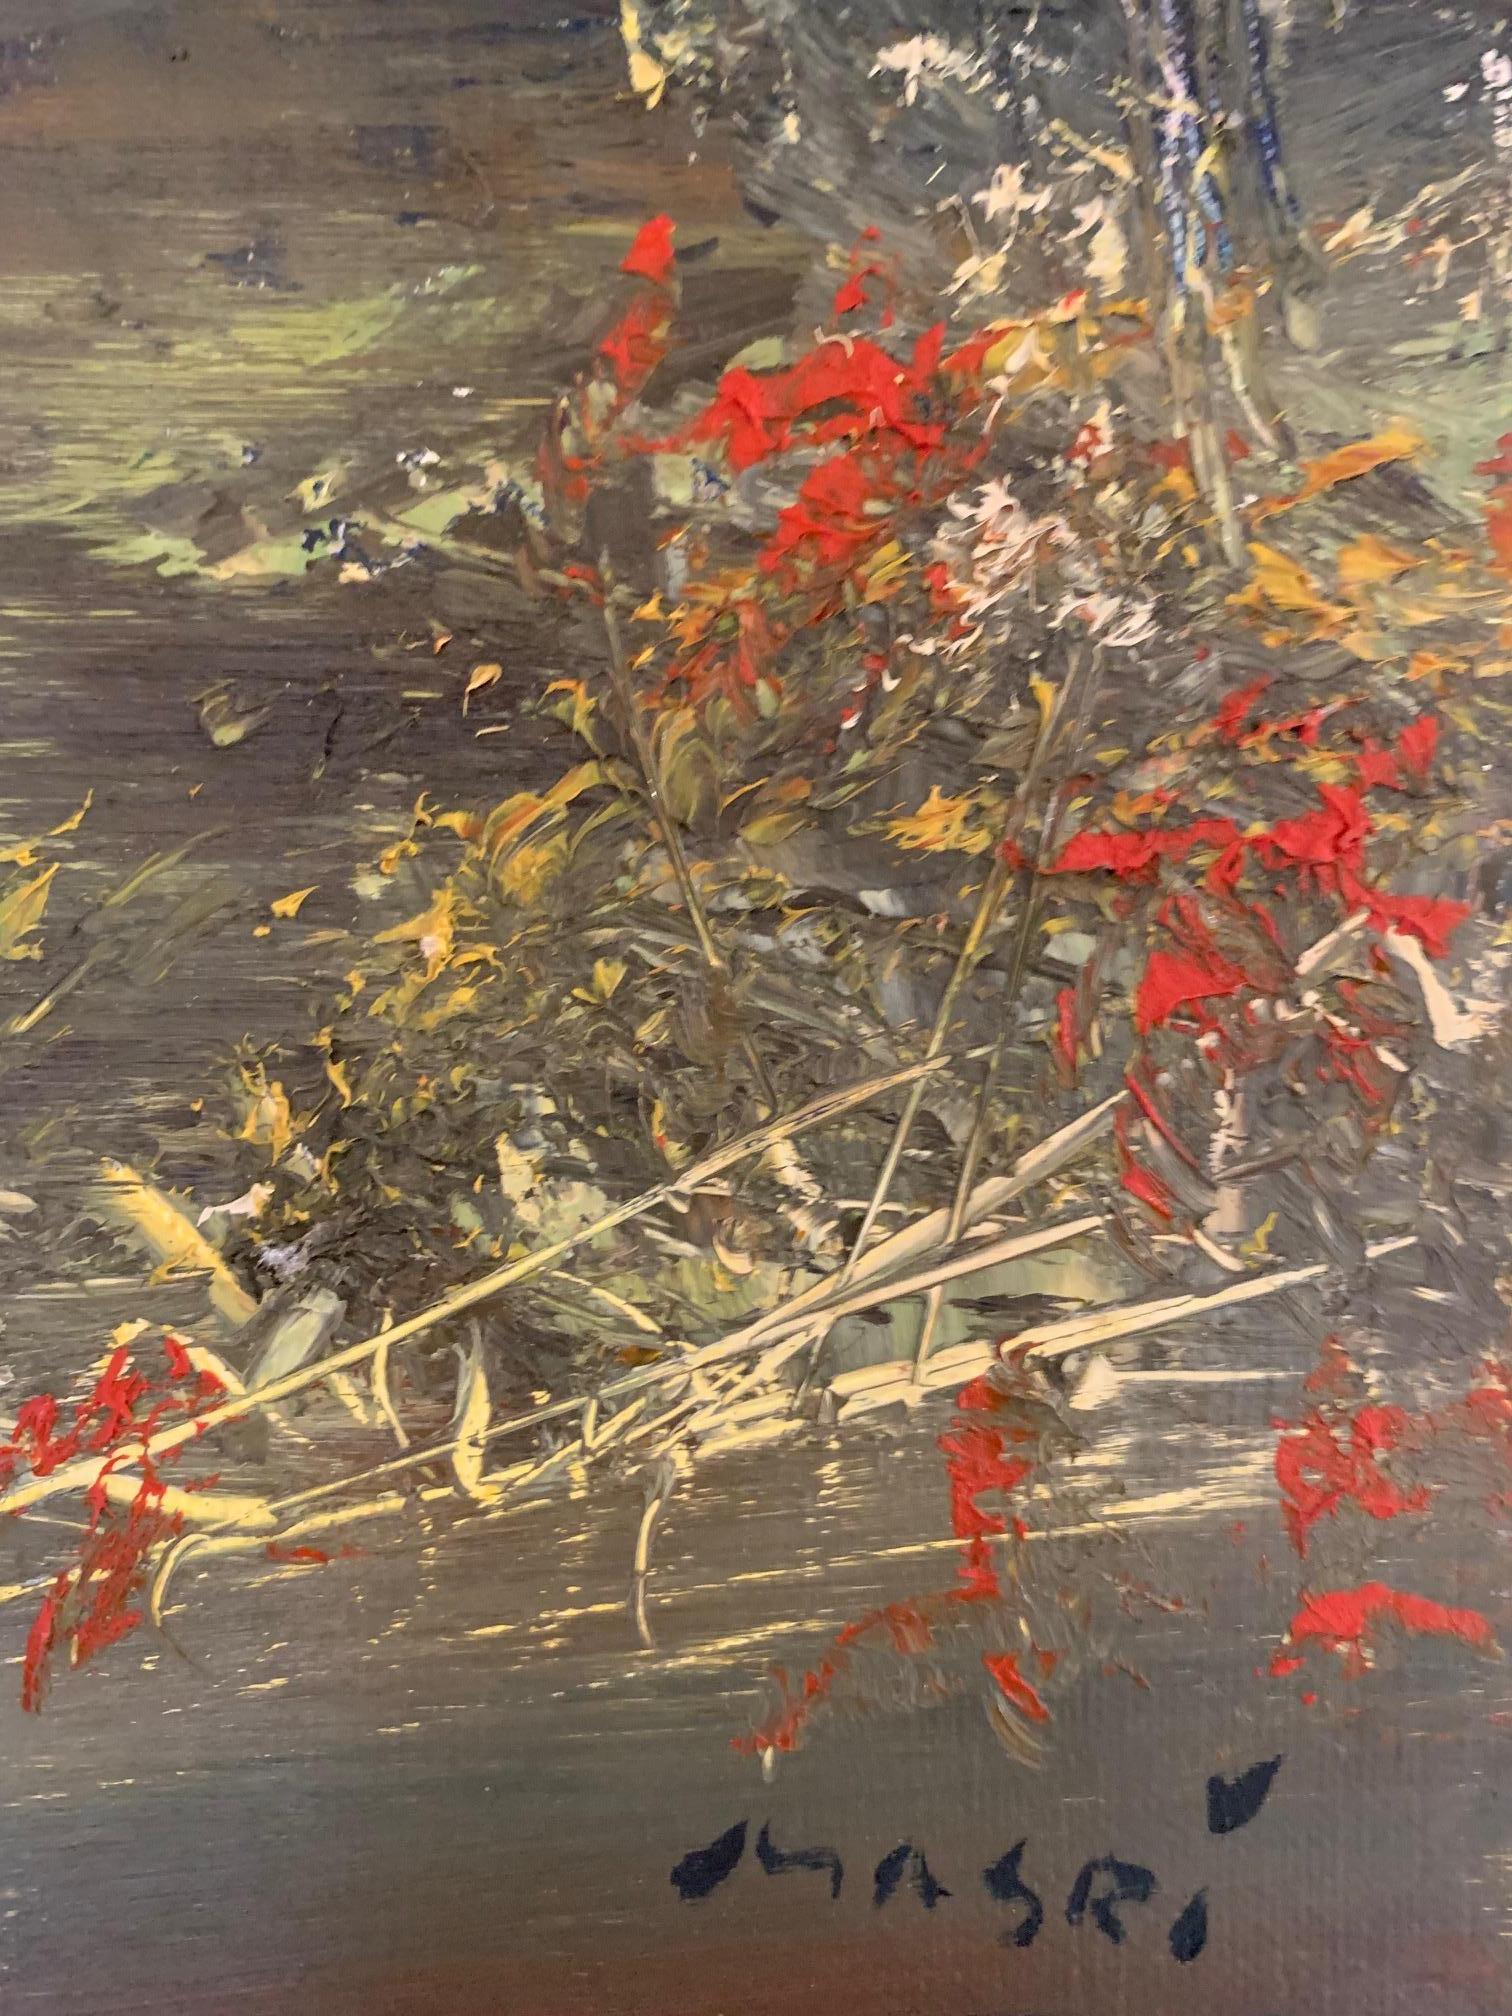 'Nature with Red' oil on canvas by Masri - Landscape Art - Expressionist Painting by Masri Hayssam